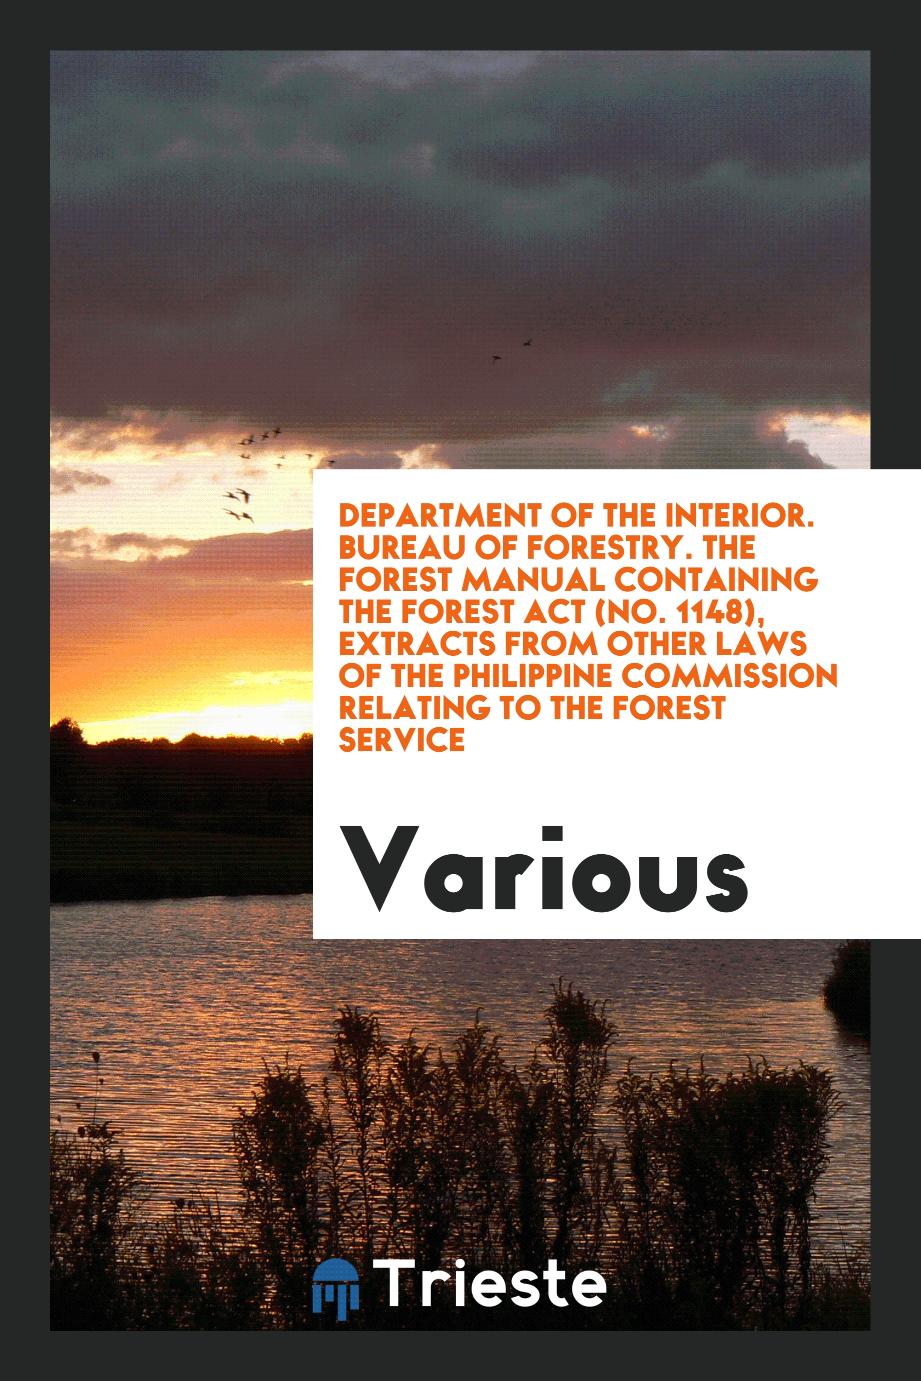 Department of the interior. Bureau of Forestry. The Forest Manual Containing the Forest Act (no. 1148), Extracts from Other Laws of the Philippine commission relating to the forest service